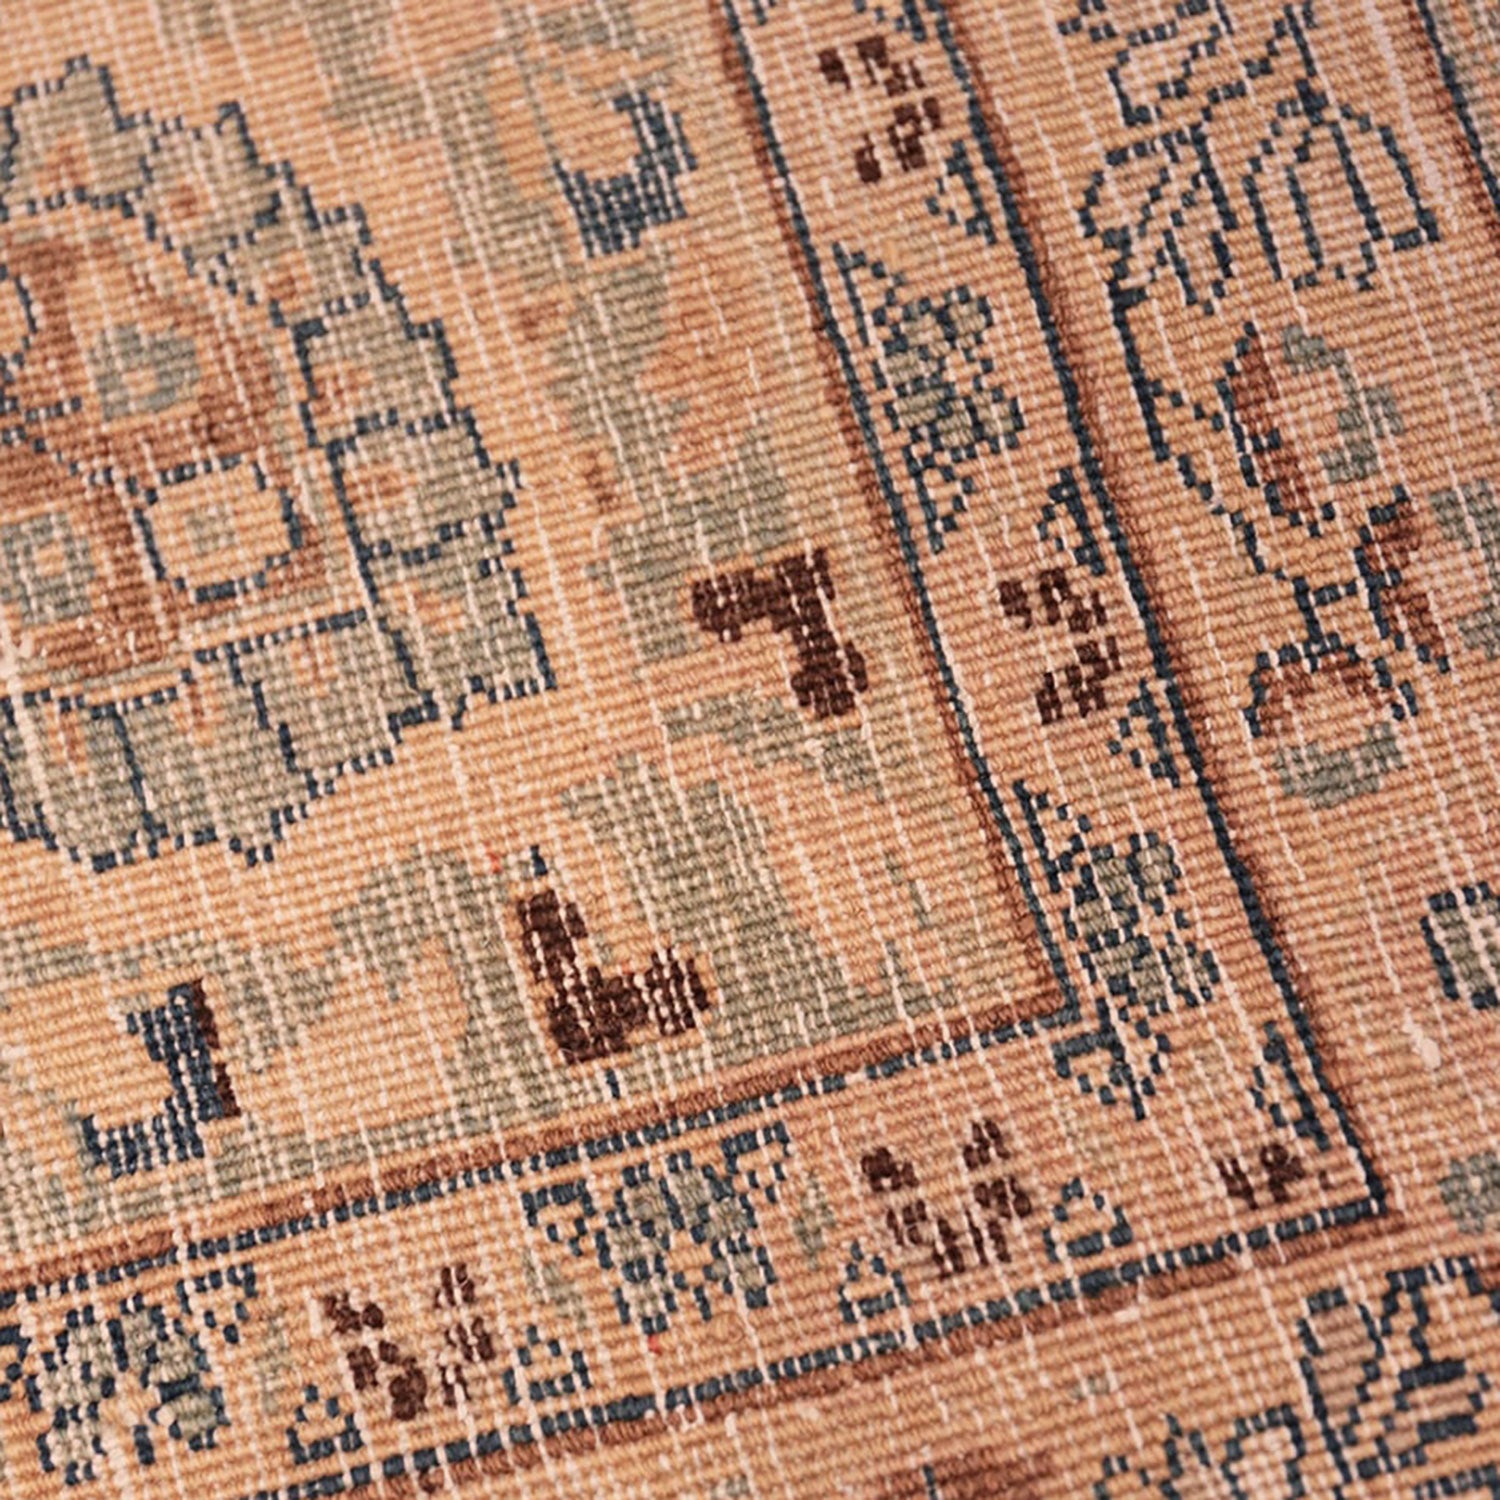 Intricate handcrafted woven fabric with geometric motifs in earth tones.